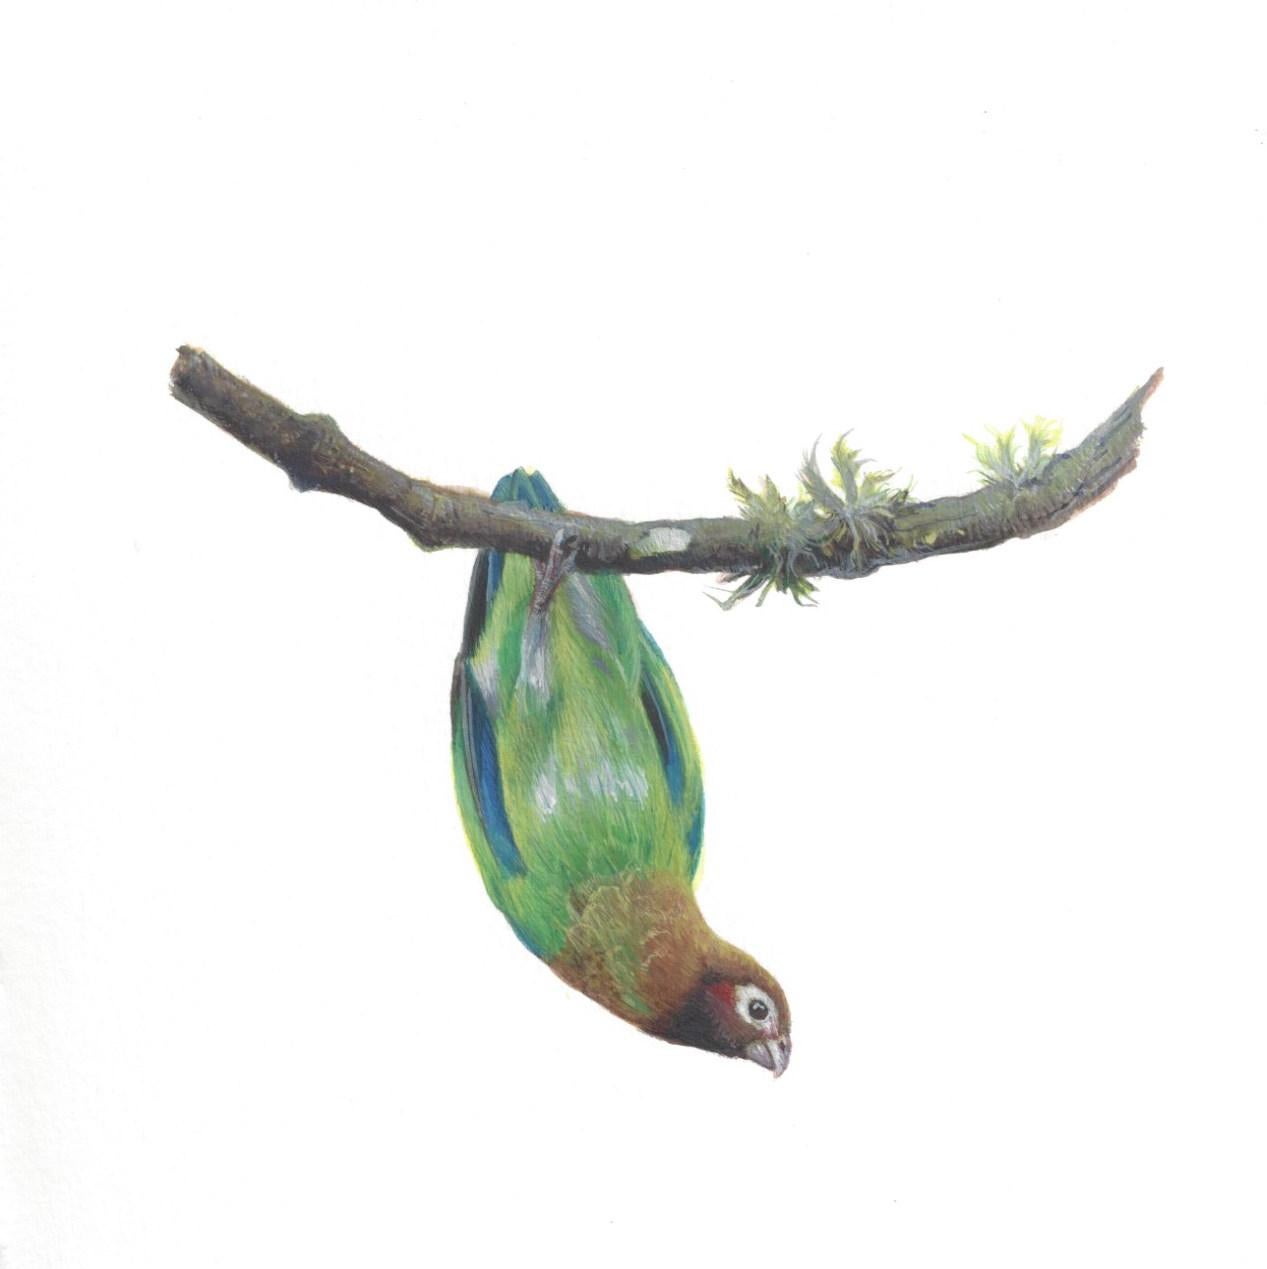 Dina Brodsky, Brown-Hooded Parrot, realist gouache animal miniature, 2018